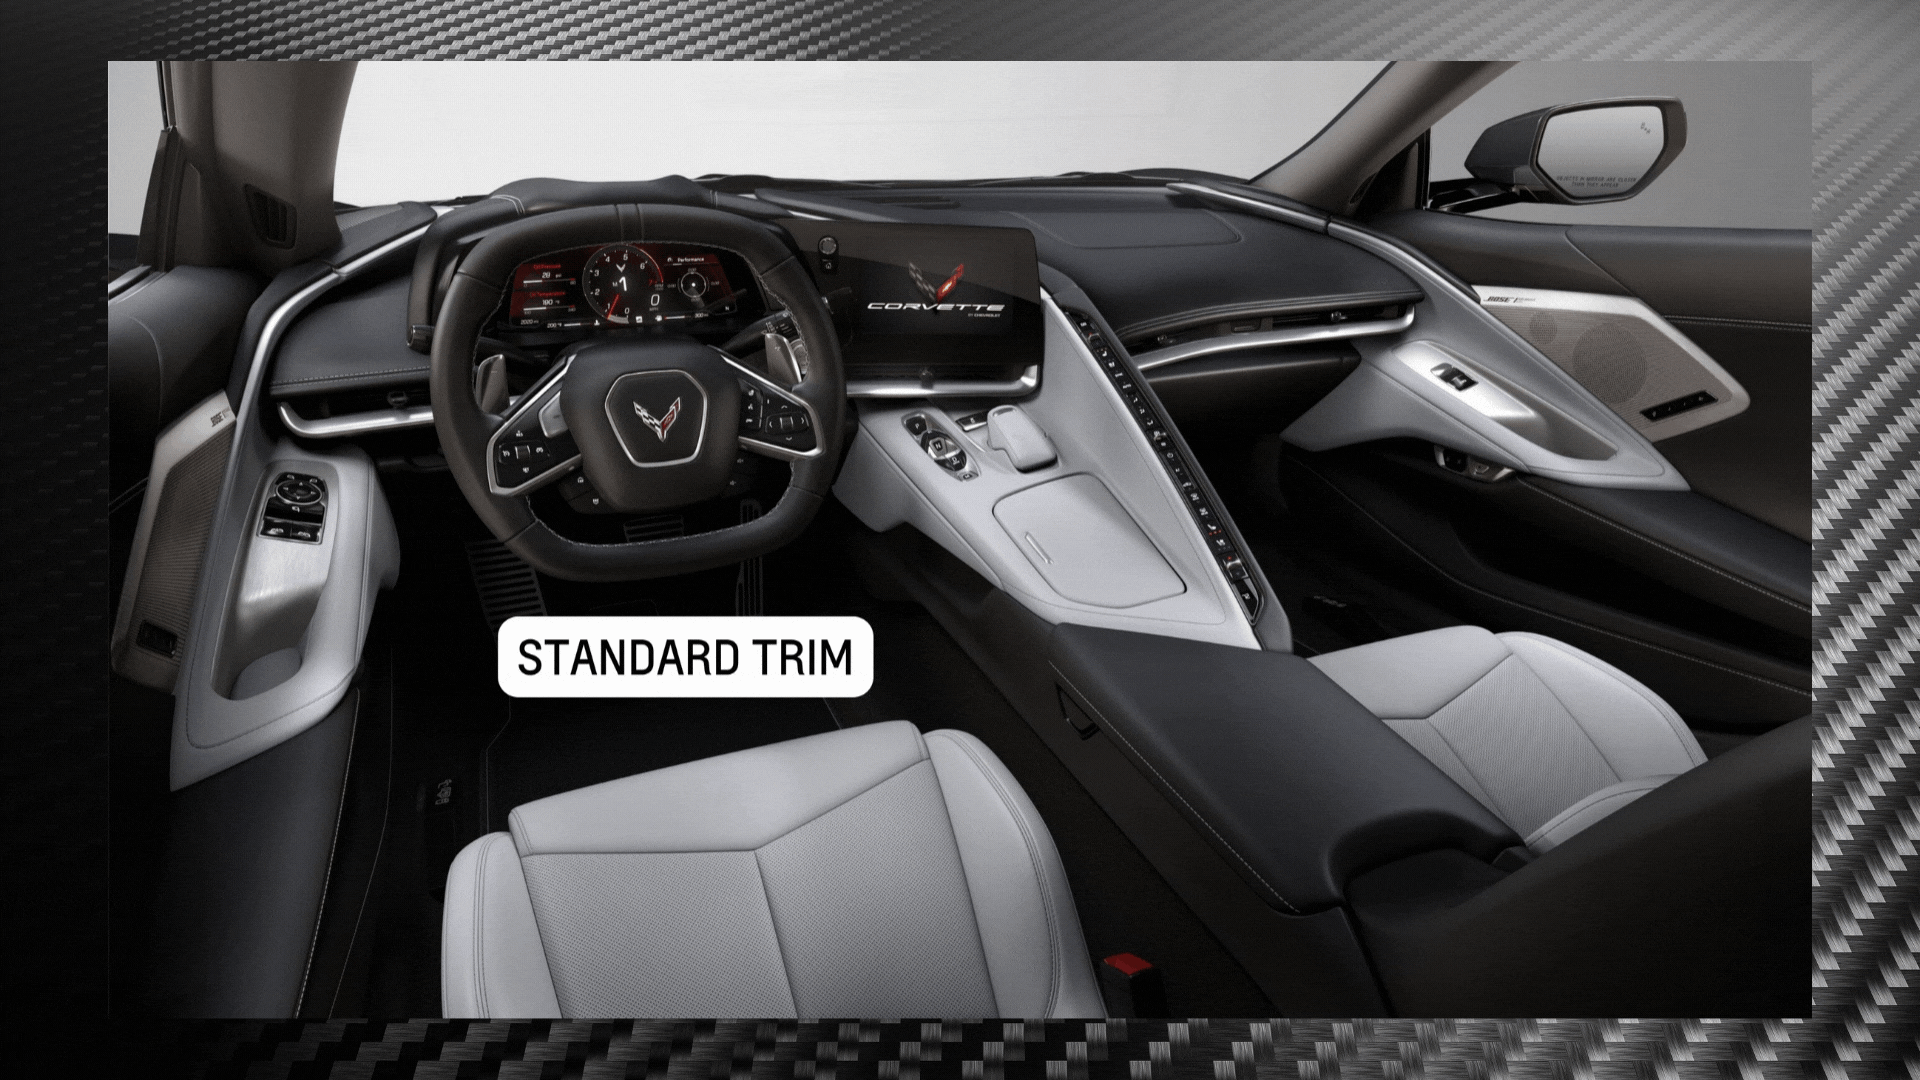 Visual representation of the difference between standard trim and stealth trim.